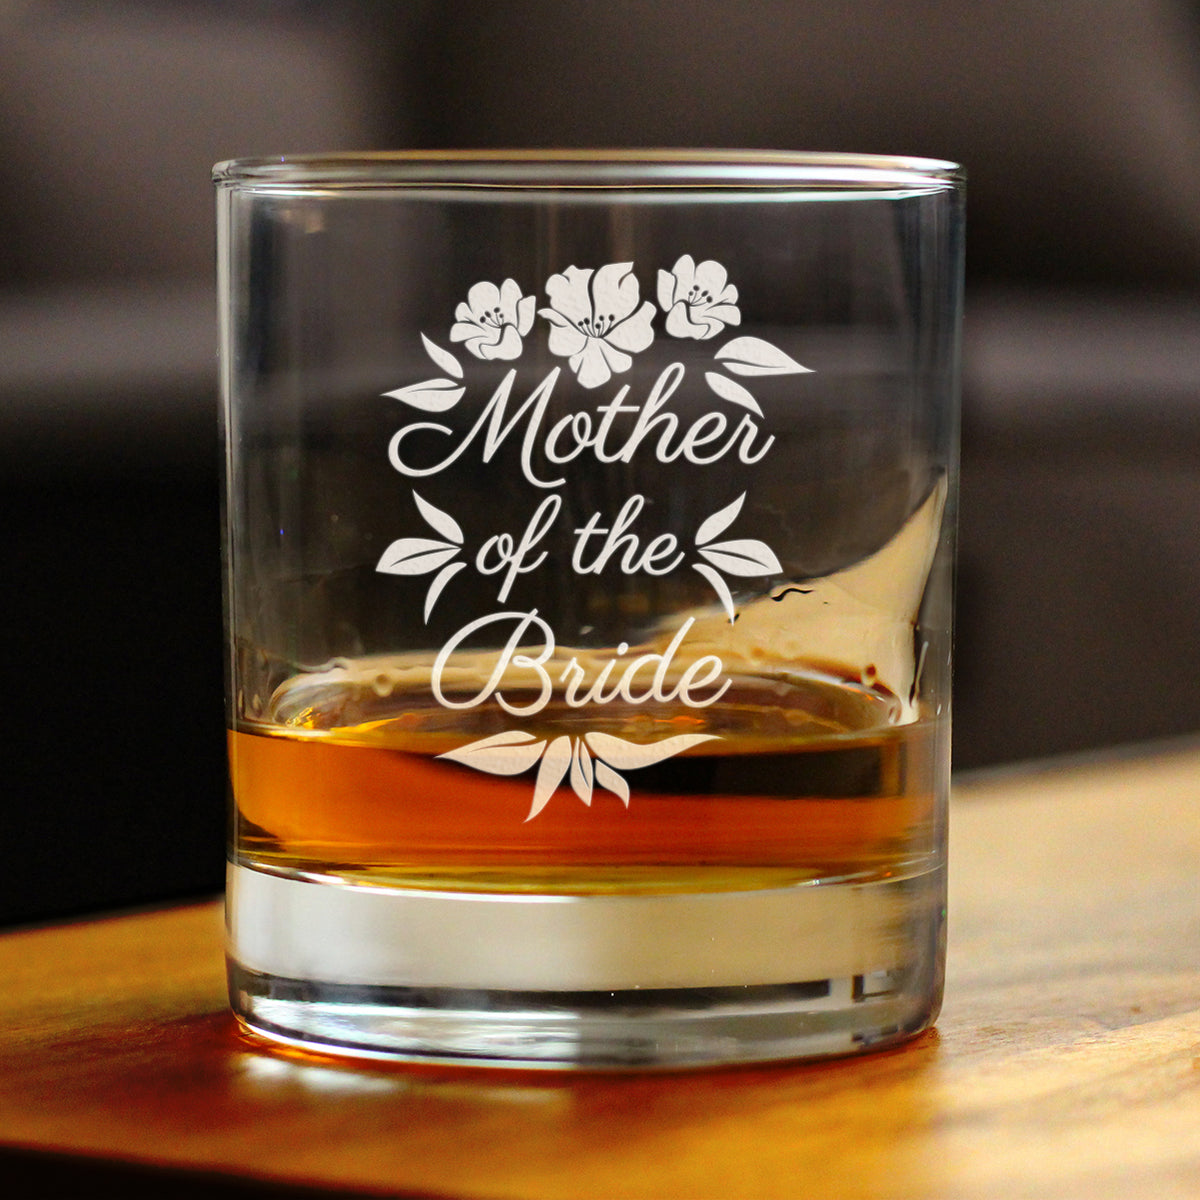 Mother of the Bride Old Fashioned Rocks Glass - Unique Wedding Gift for Soon to Be Mother-in-Law - Cute Engraved Wedding Cup Gift